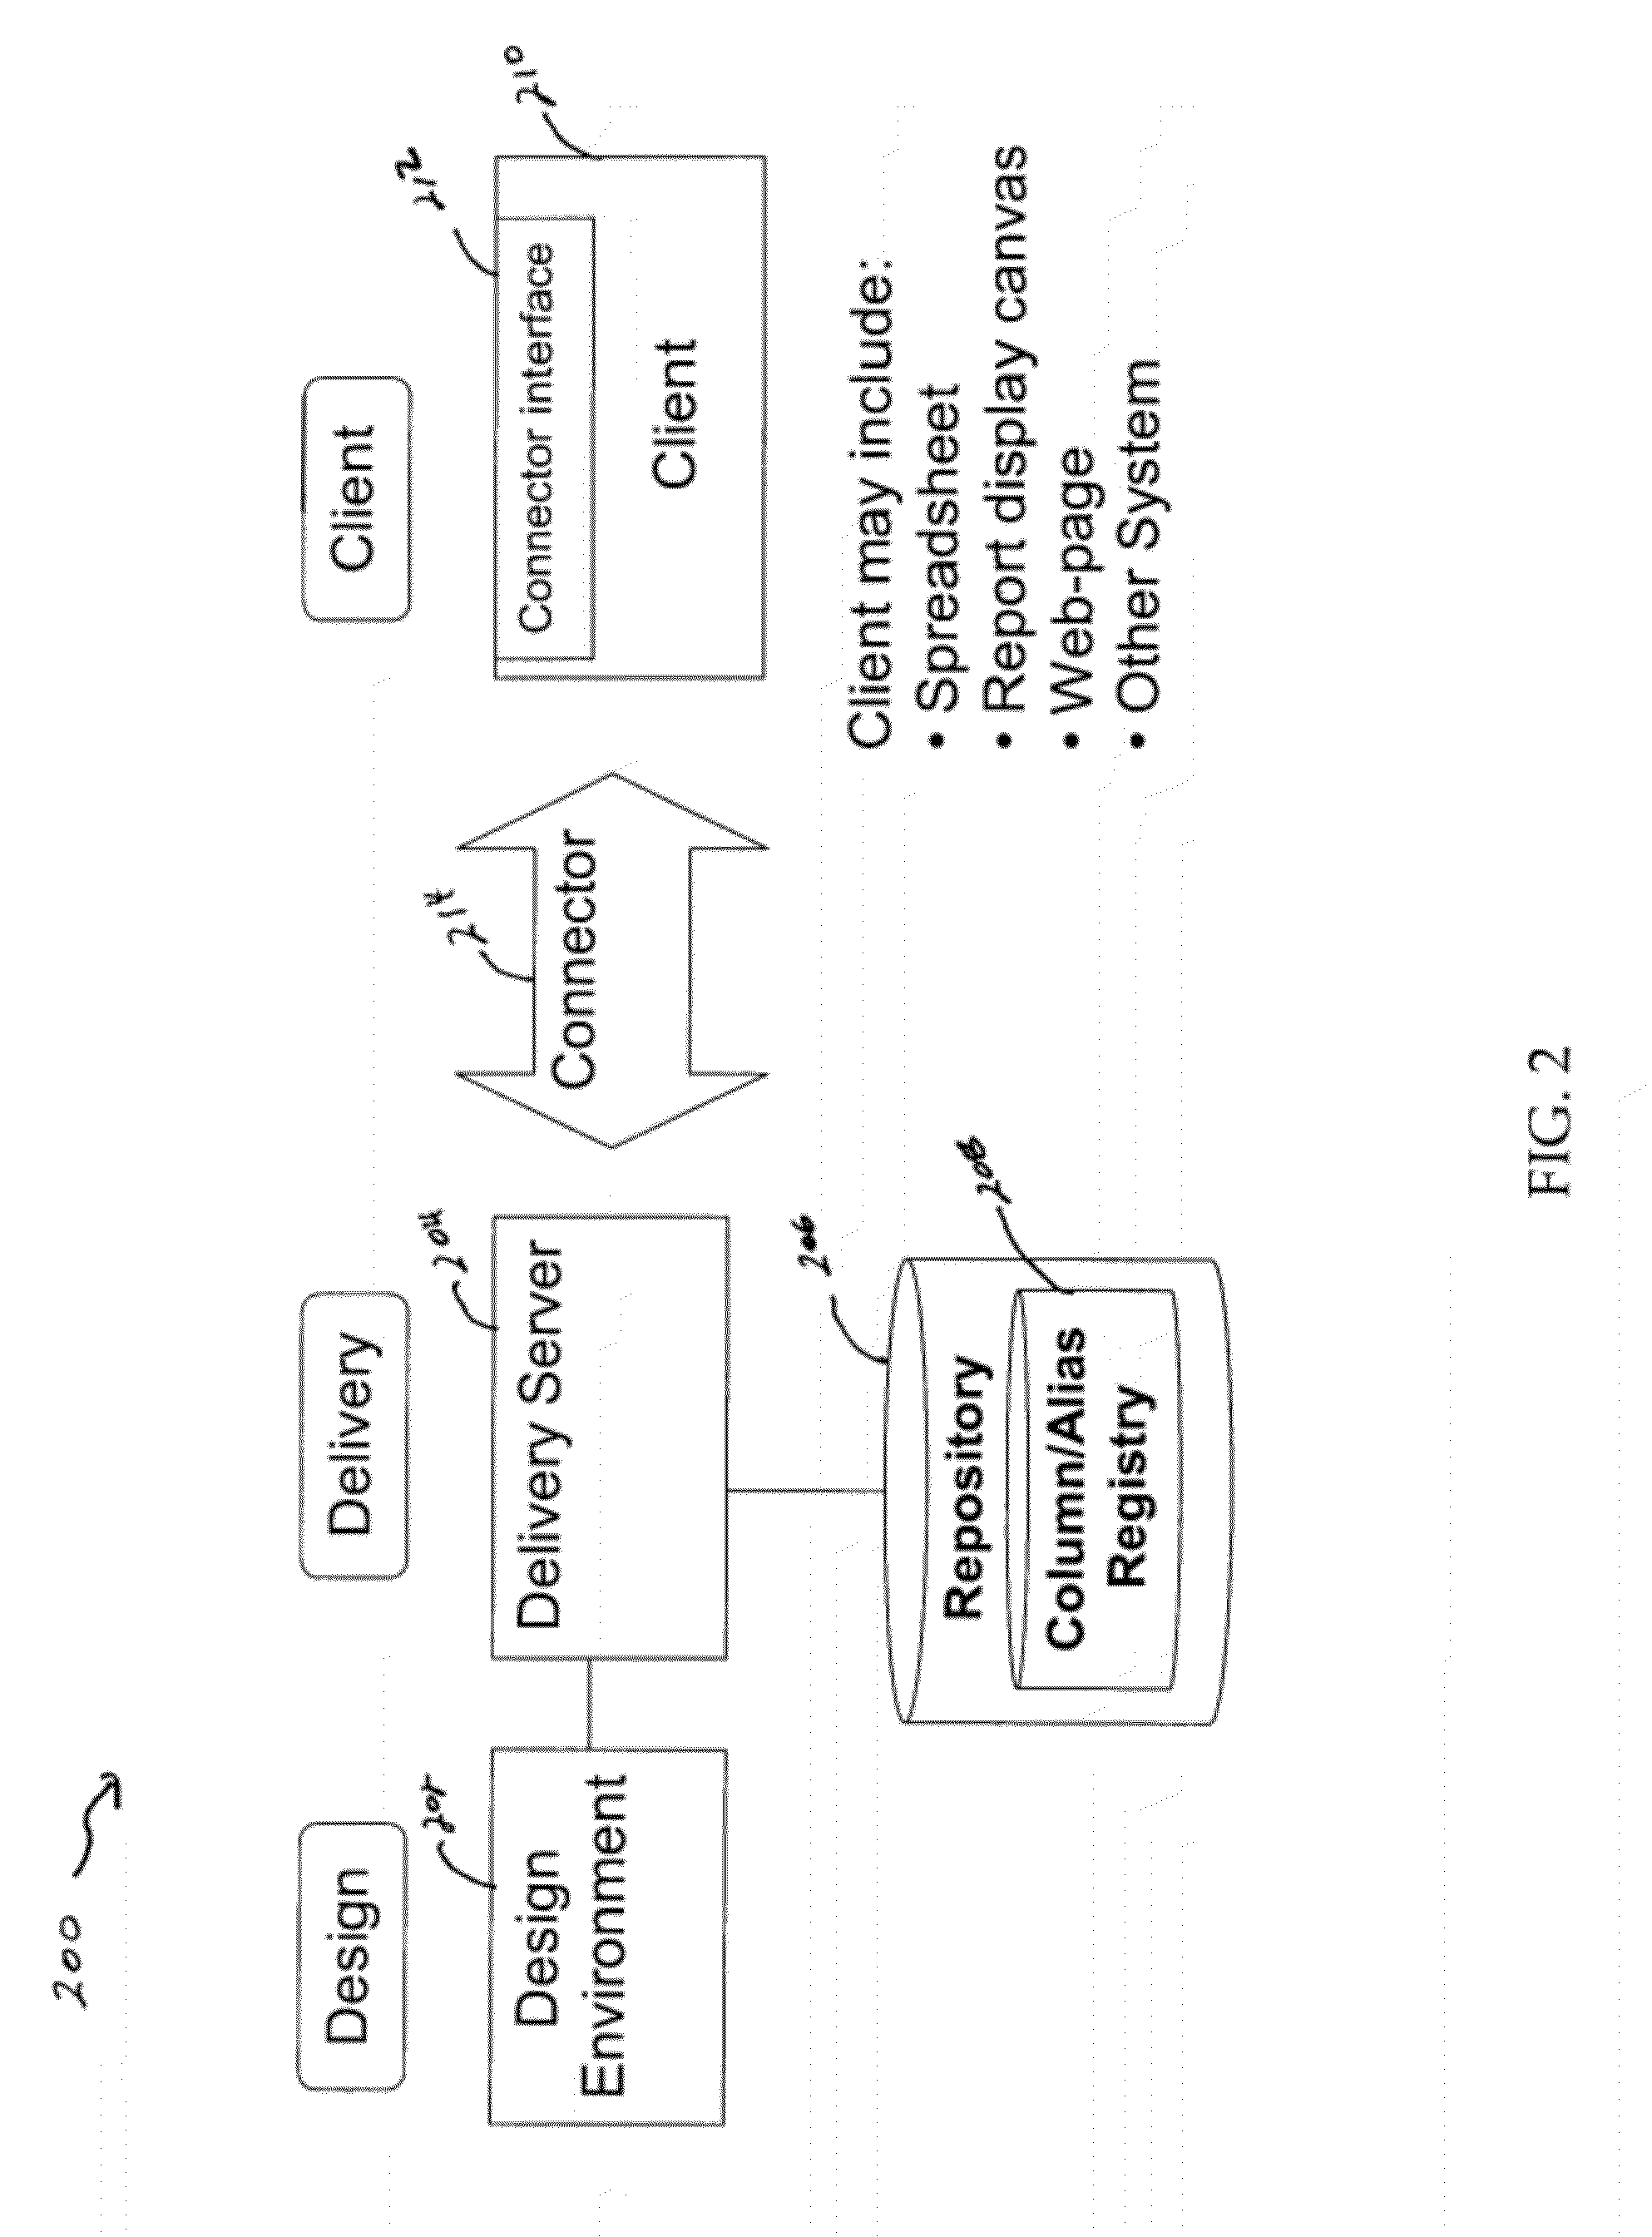 Method and system for replacing data in a structured design template